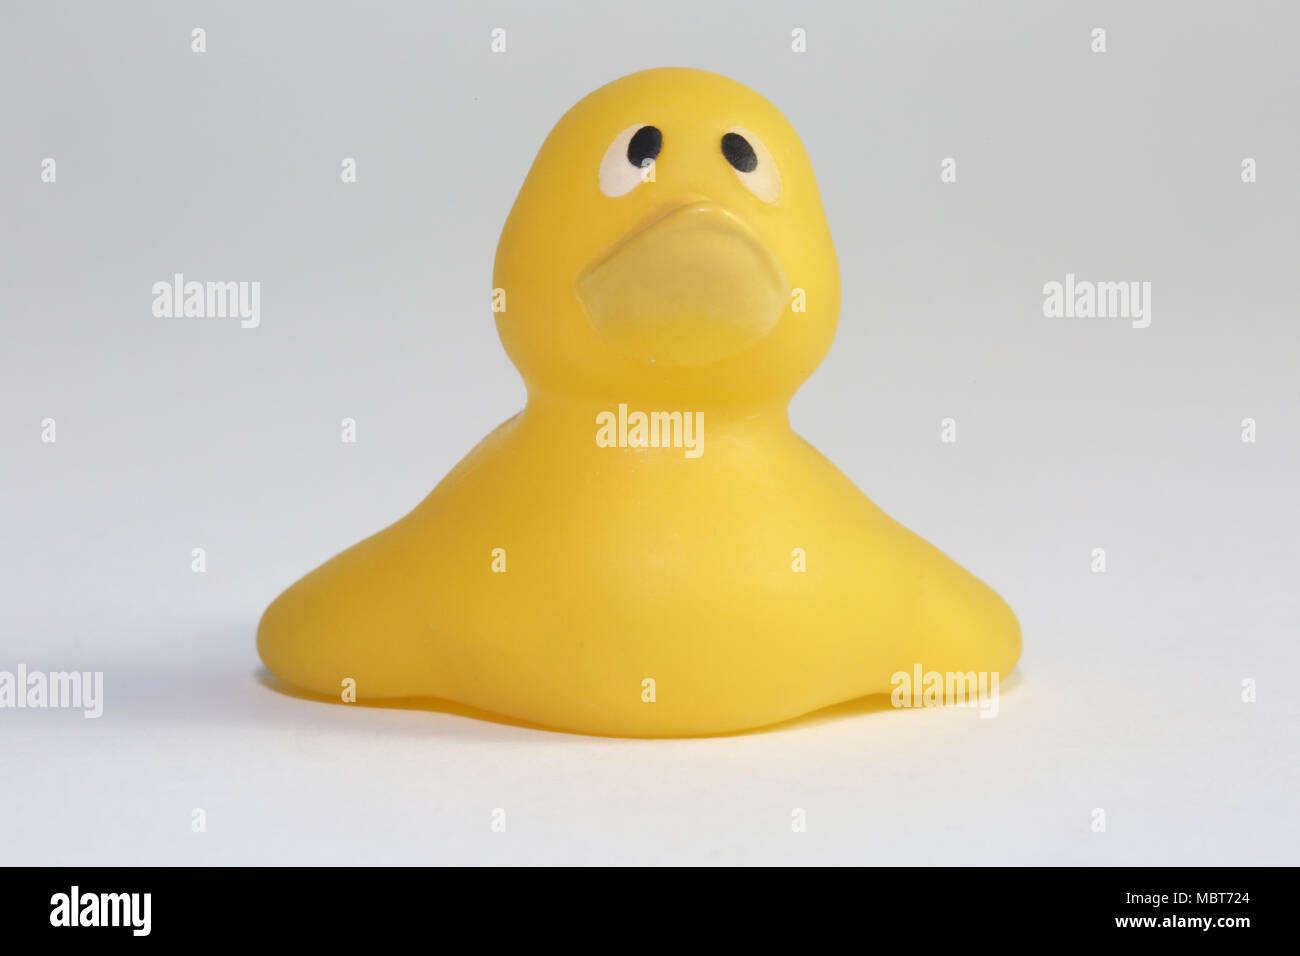 A single yellow plastic toy duck with pleading eyes. The type of plastic duck that you would put in a bath. The expression evokes a sense of sympathy. Stock Photo